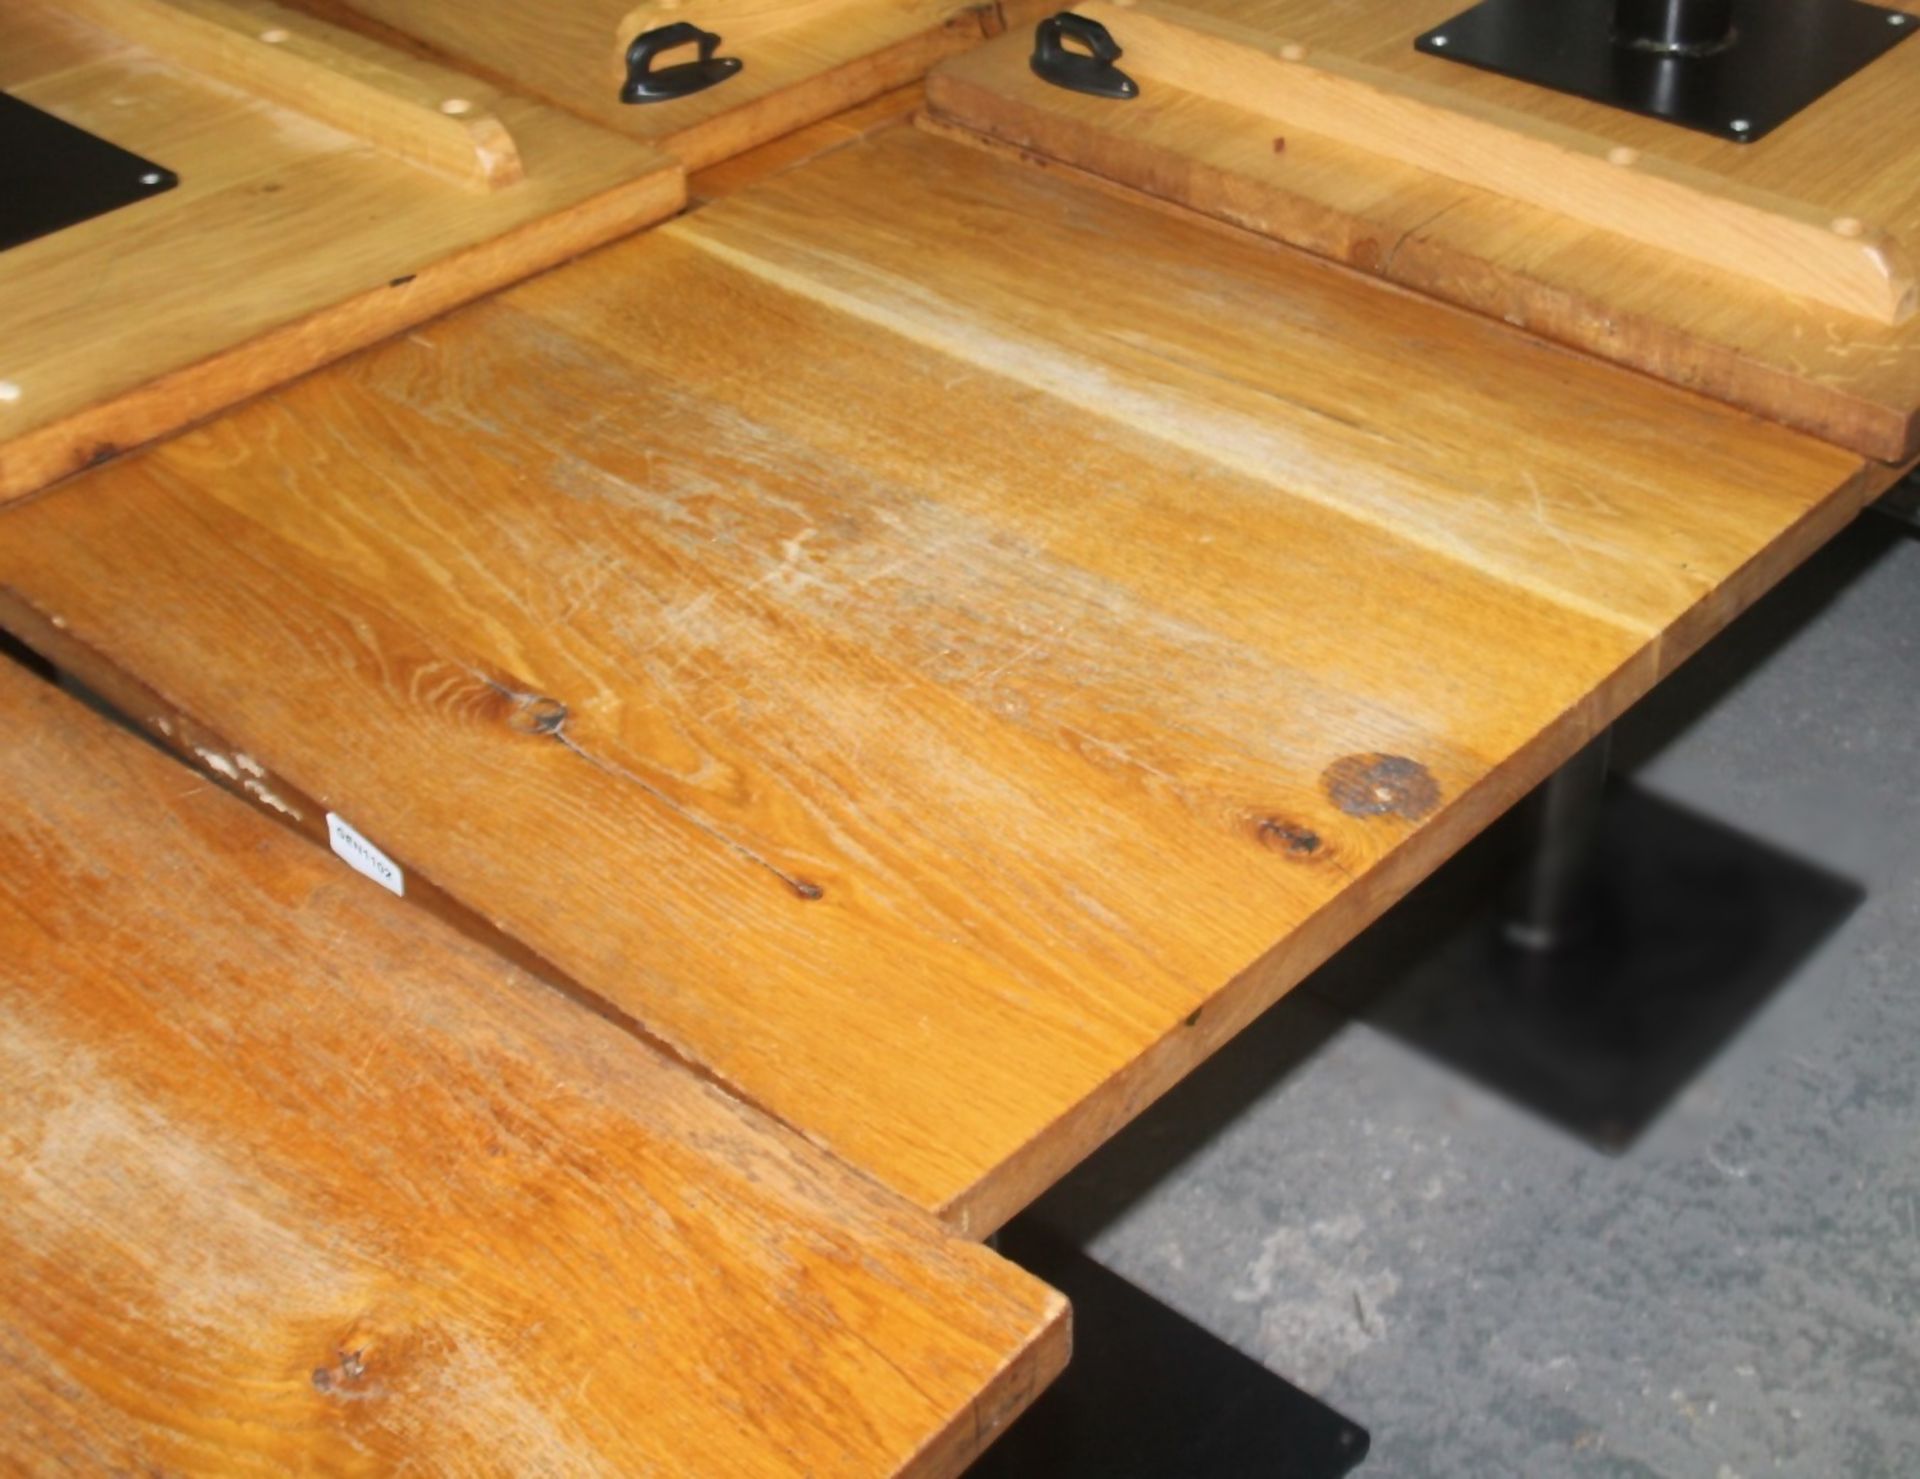 4 x Solid Oak Restaurant Dining Tables - Natural Rustic Knotty Oak Tops With Black Cast Iron Bases - Image 3 of 4